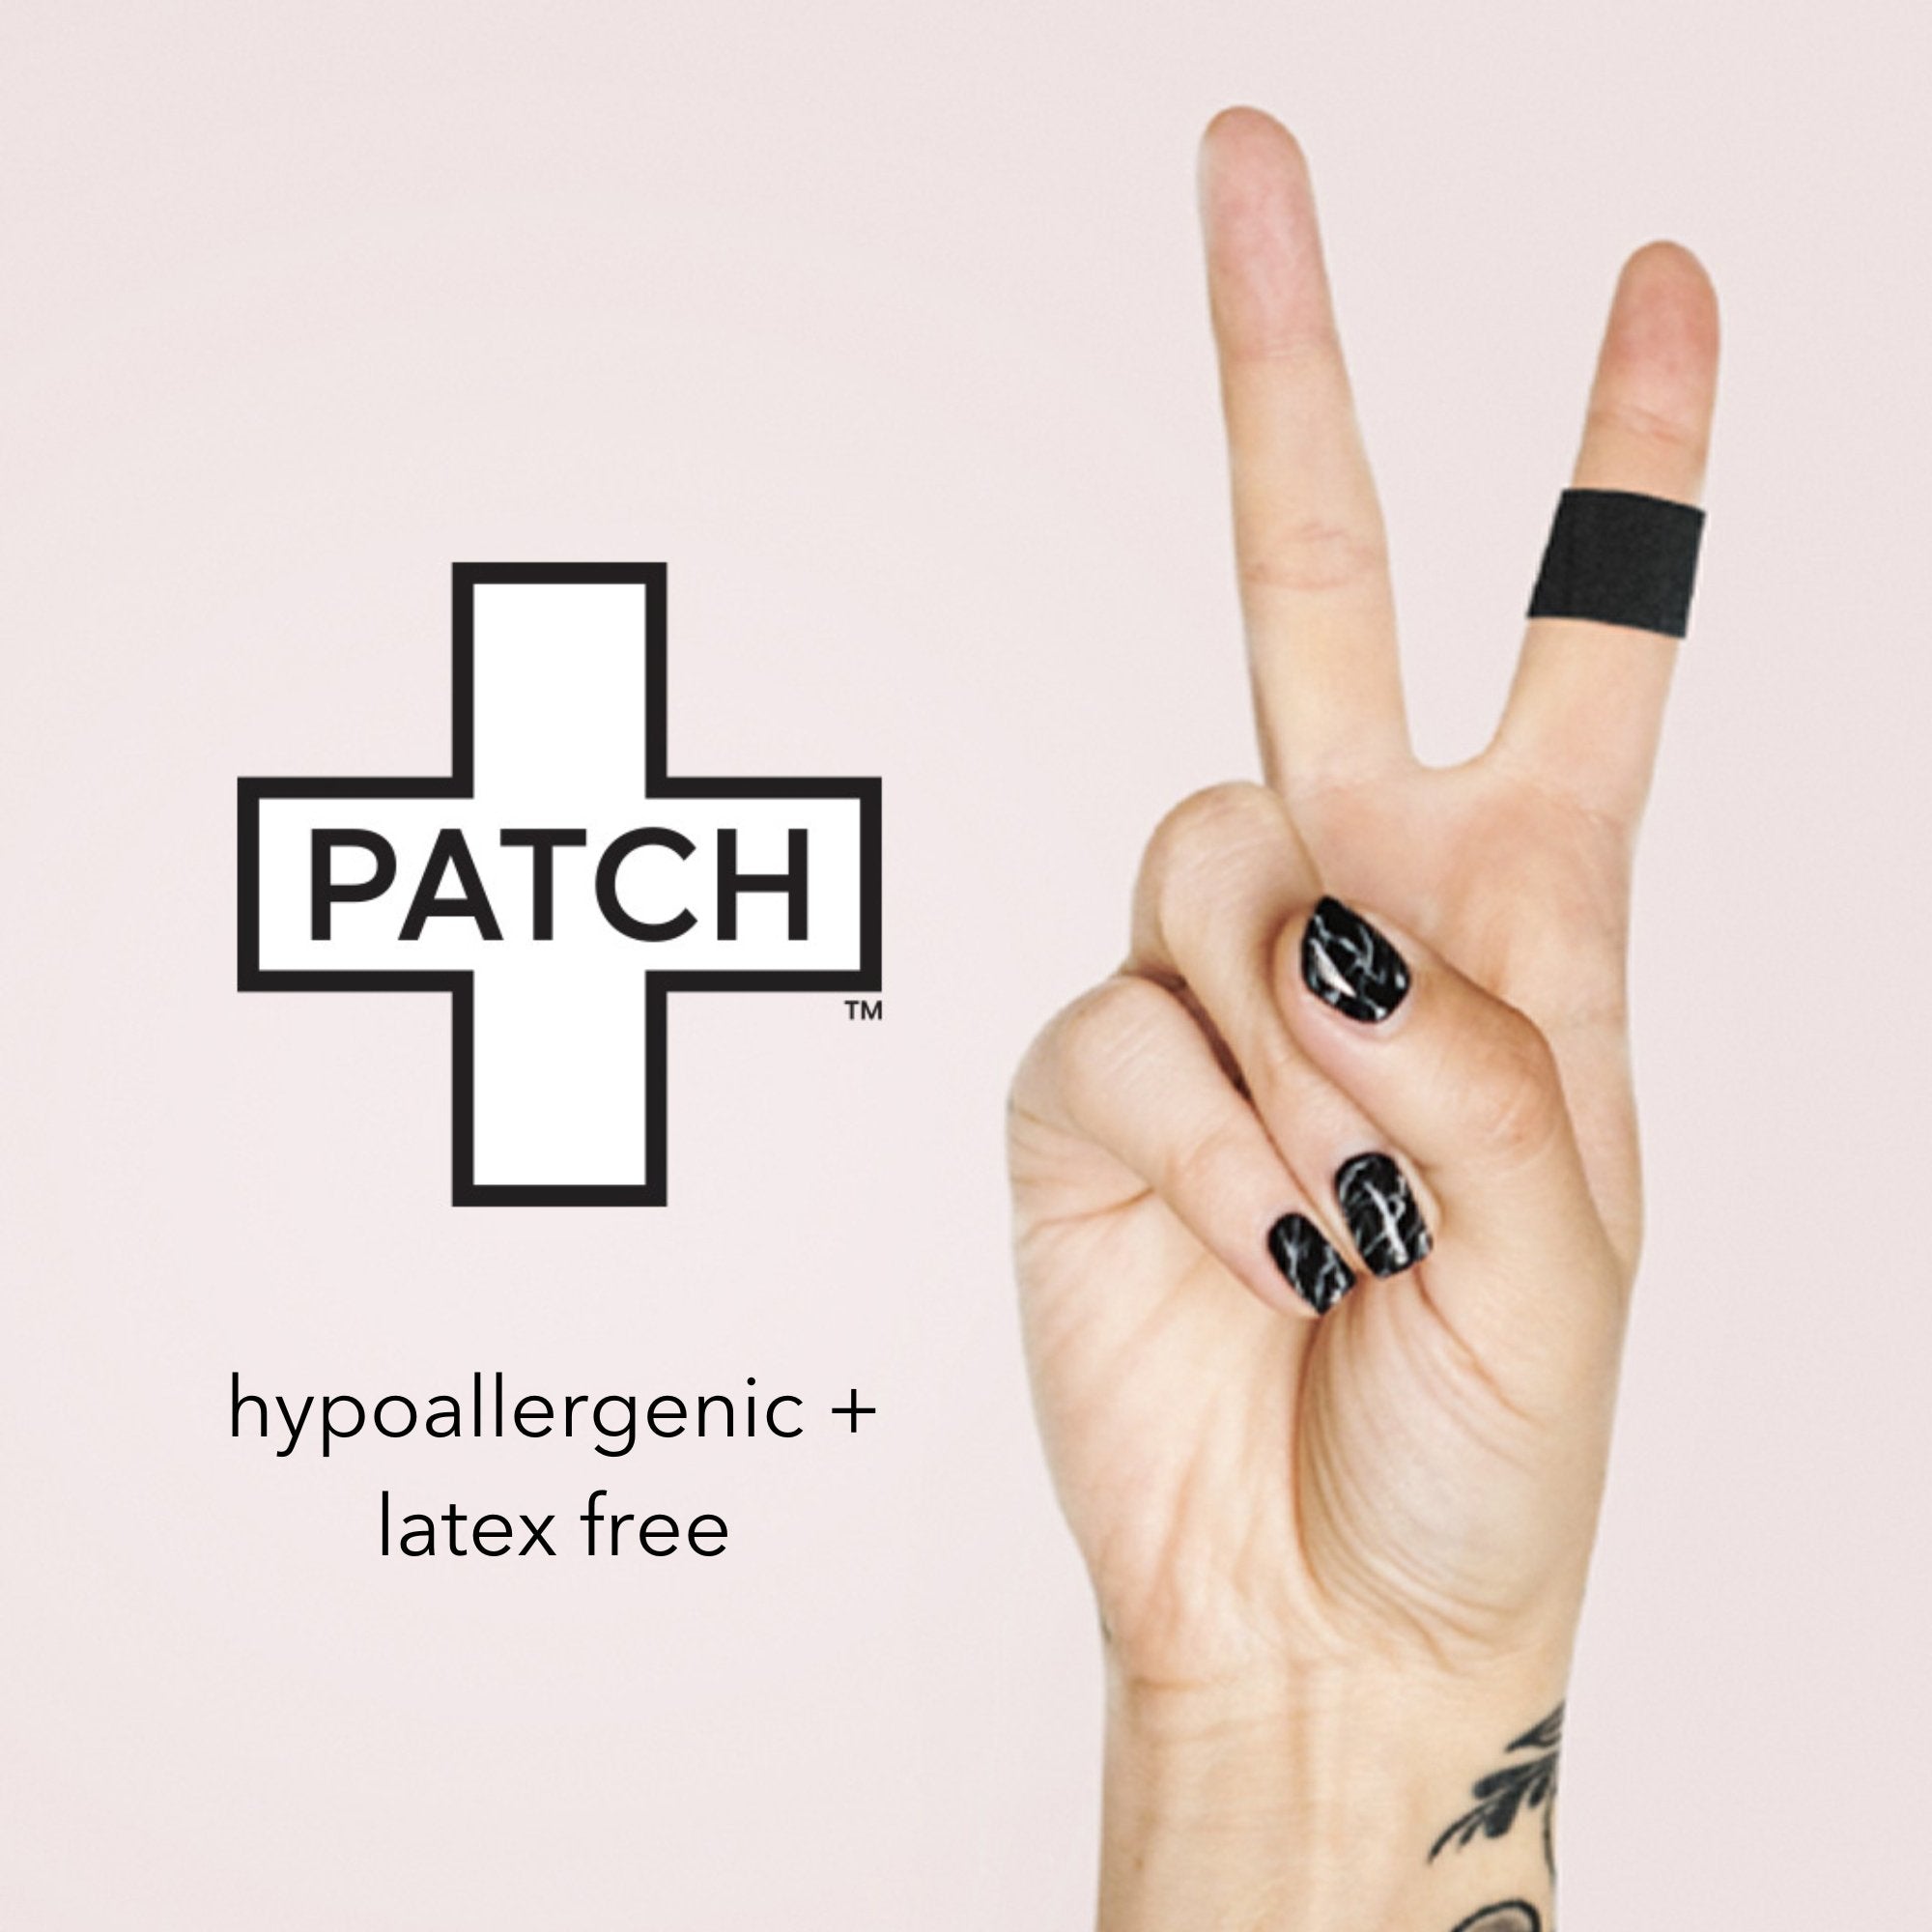 Adhesive Strip Patch™ On The Go Pack 3/4 X 3 Inch Bamboo / Activated Charcoal Rectangle Black Sterile